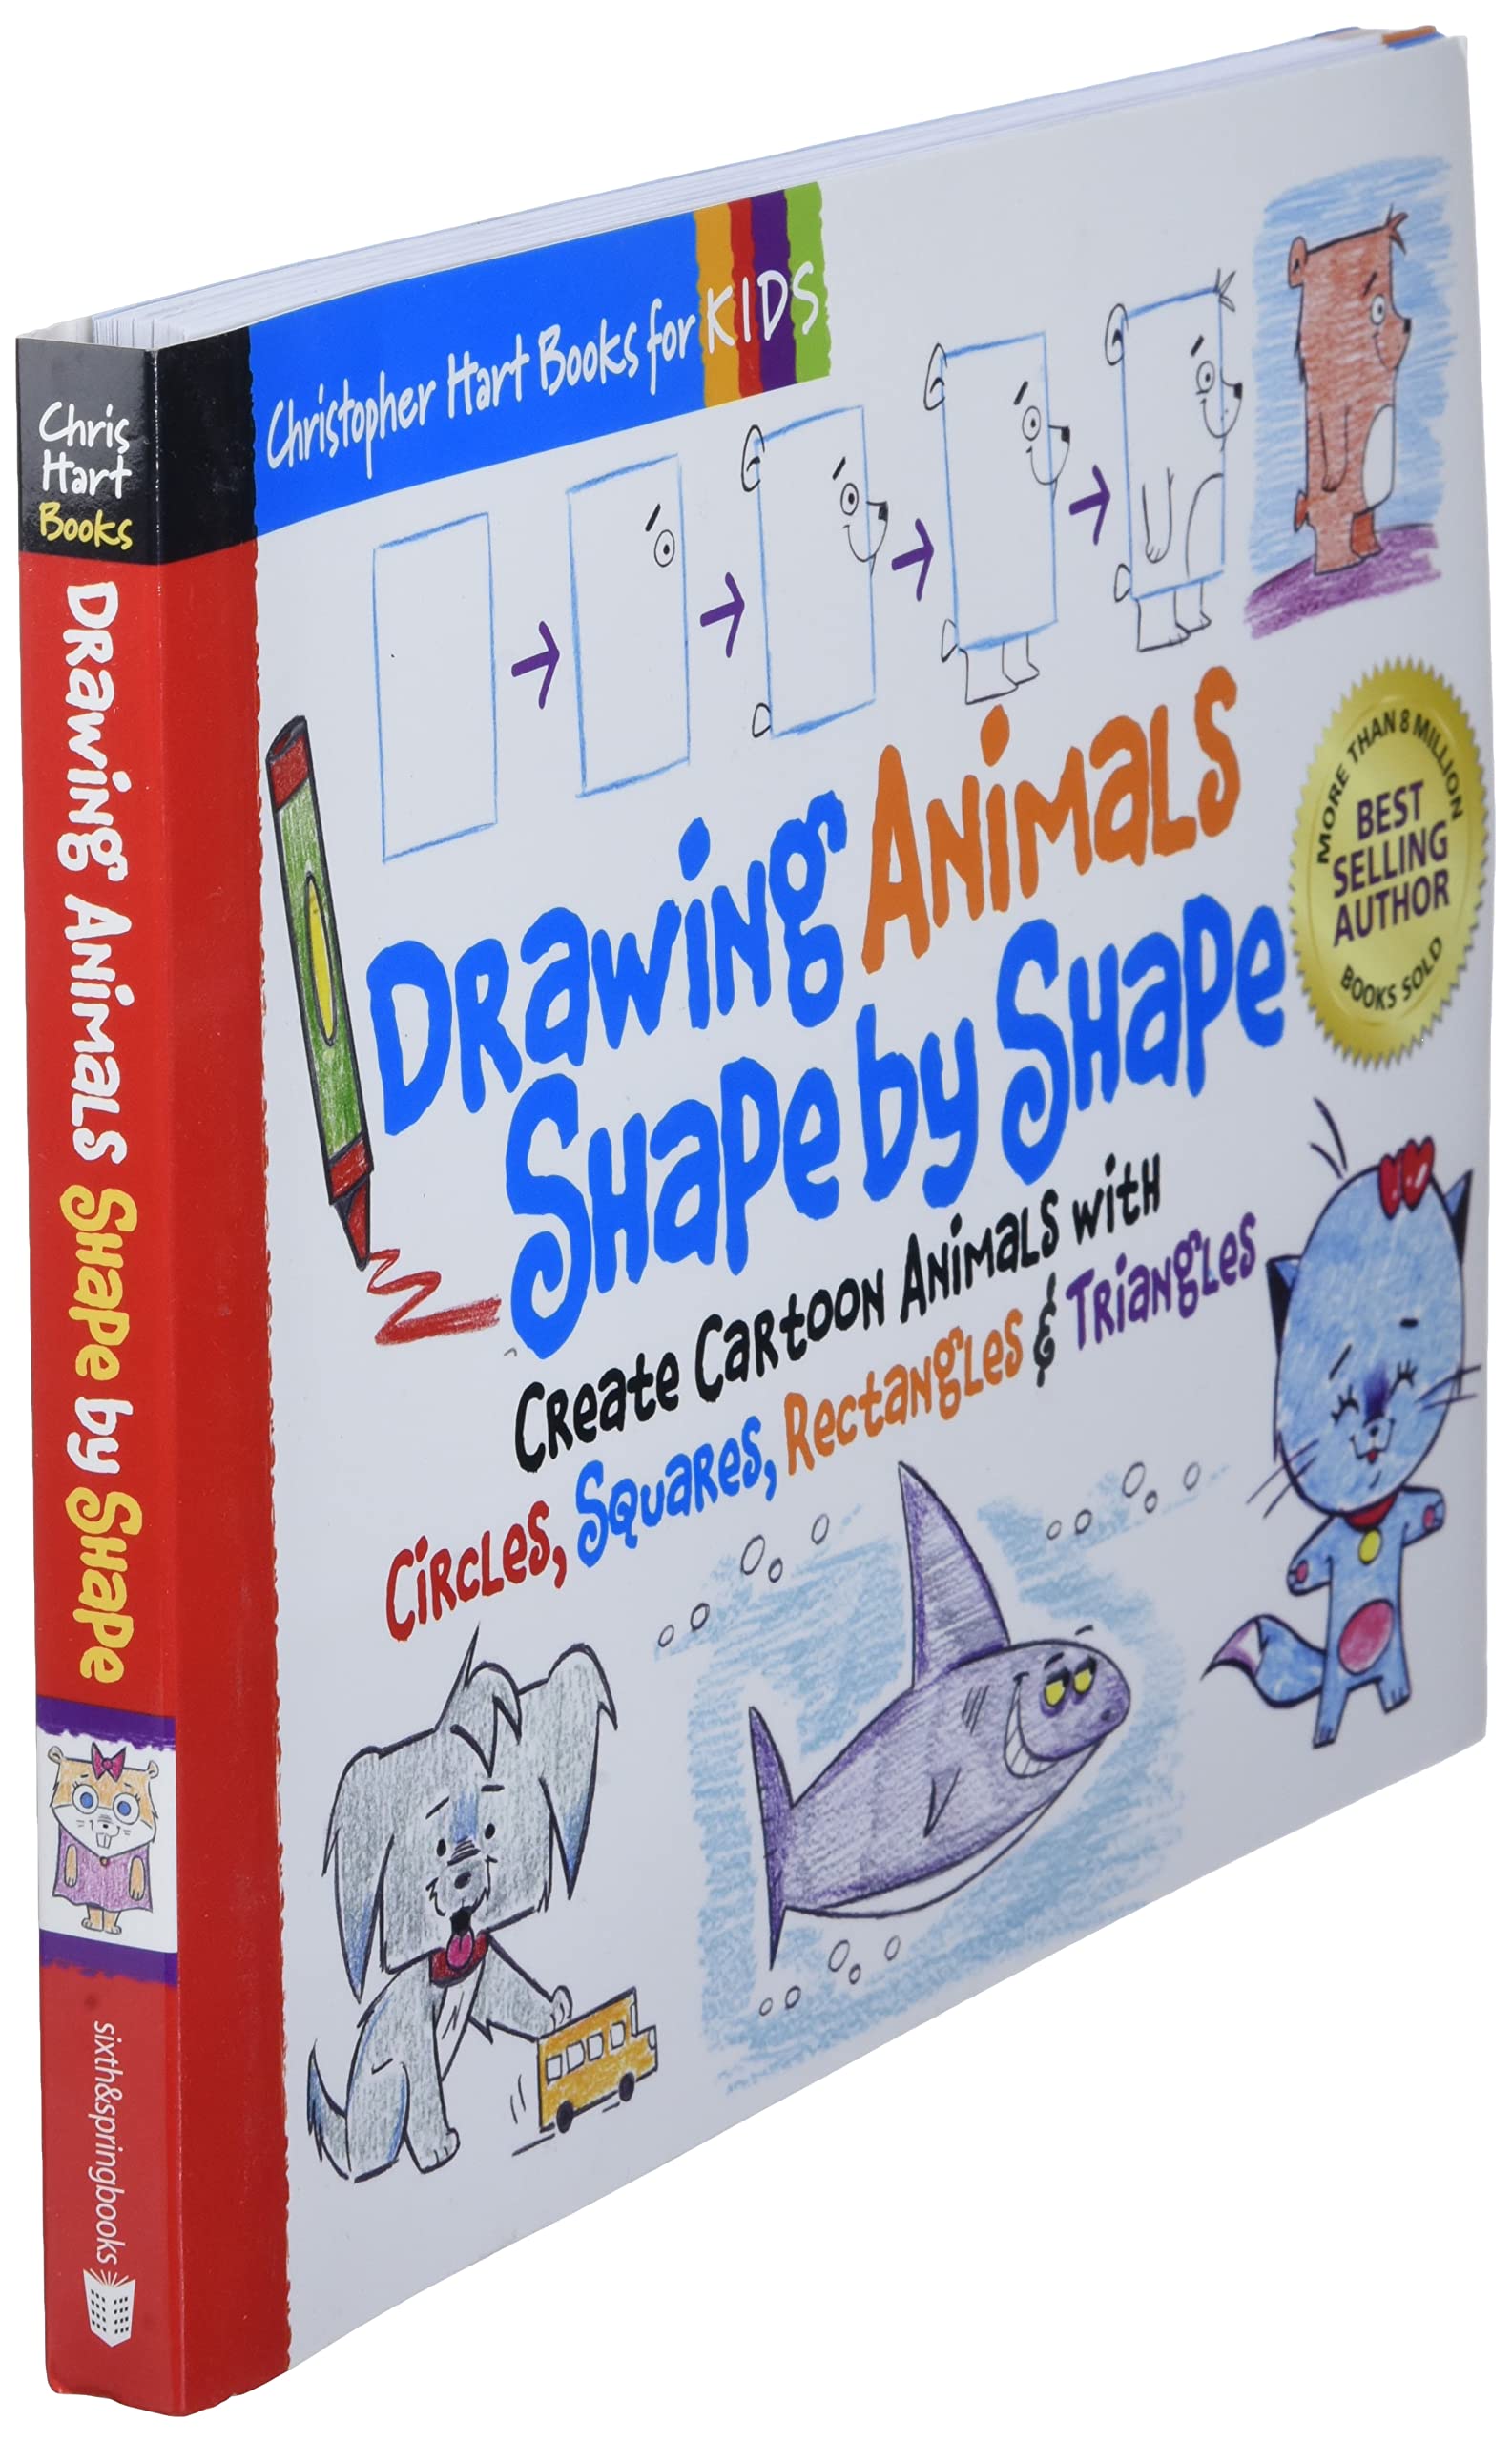 Drawing Animals Shape by Shape: Create Cartoon Animals with Circles, Squares, Rectangles & Triangles (Volume 2) (Christopher Hart Books for Kids)